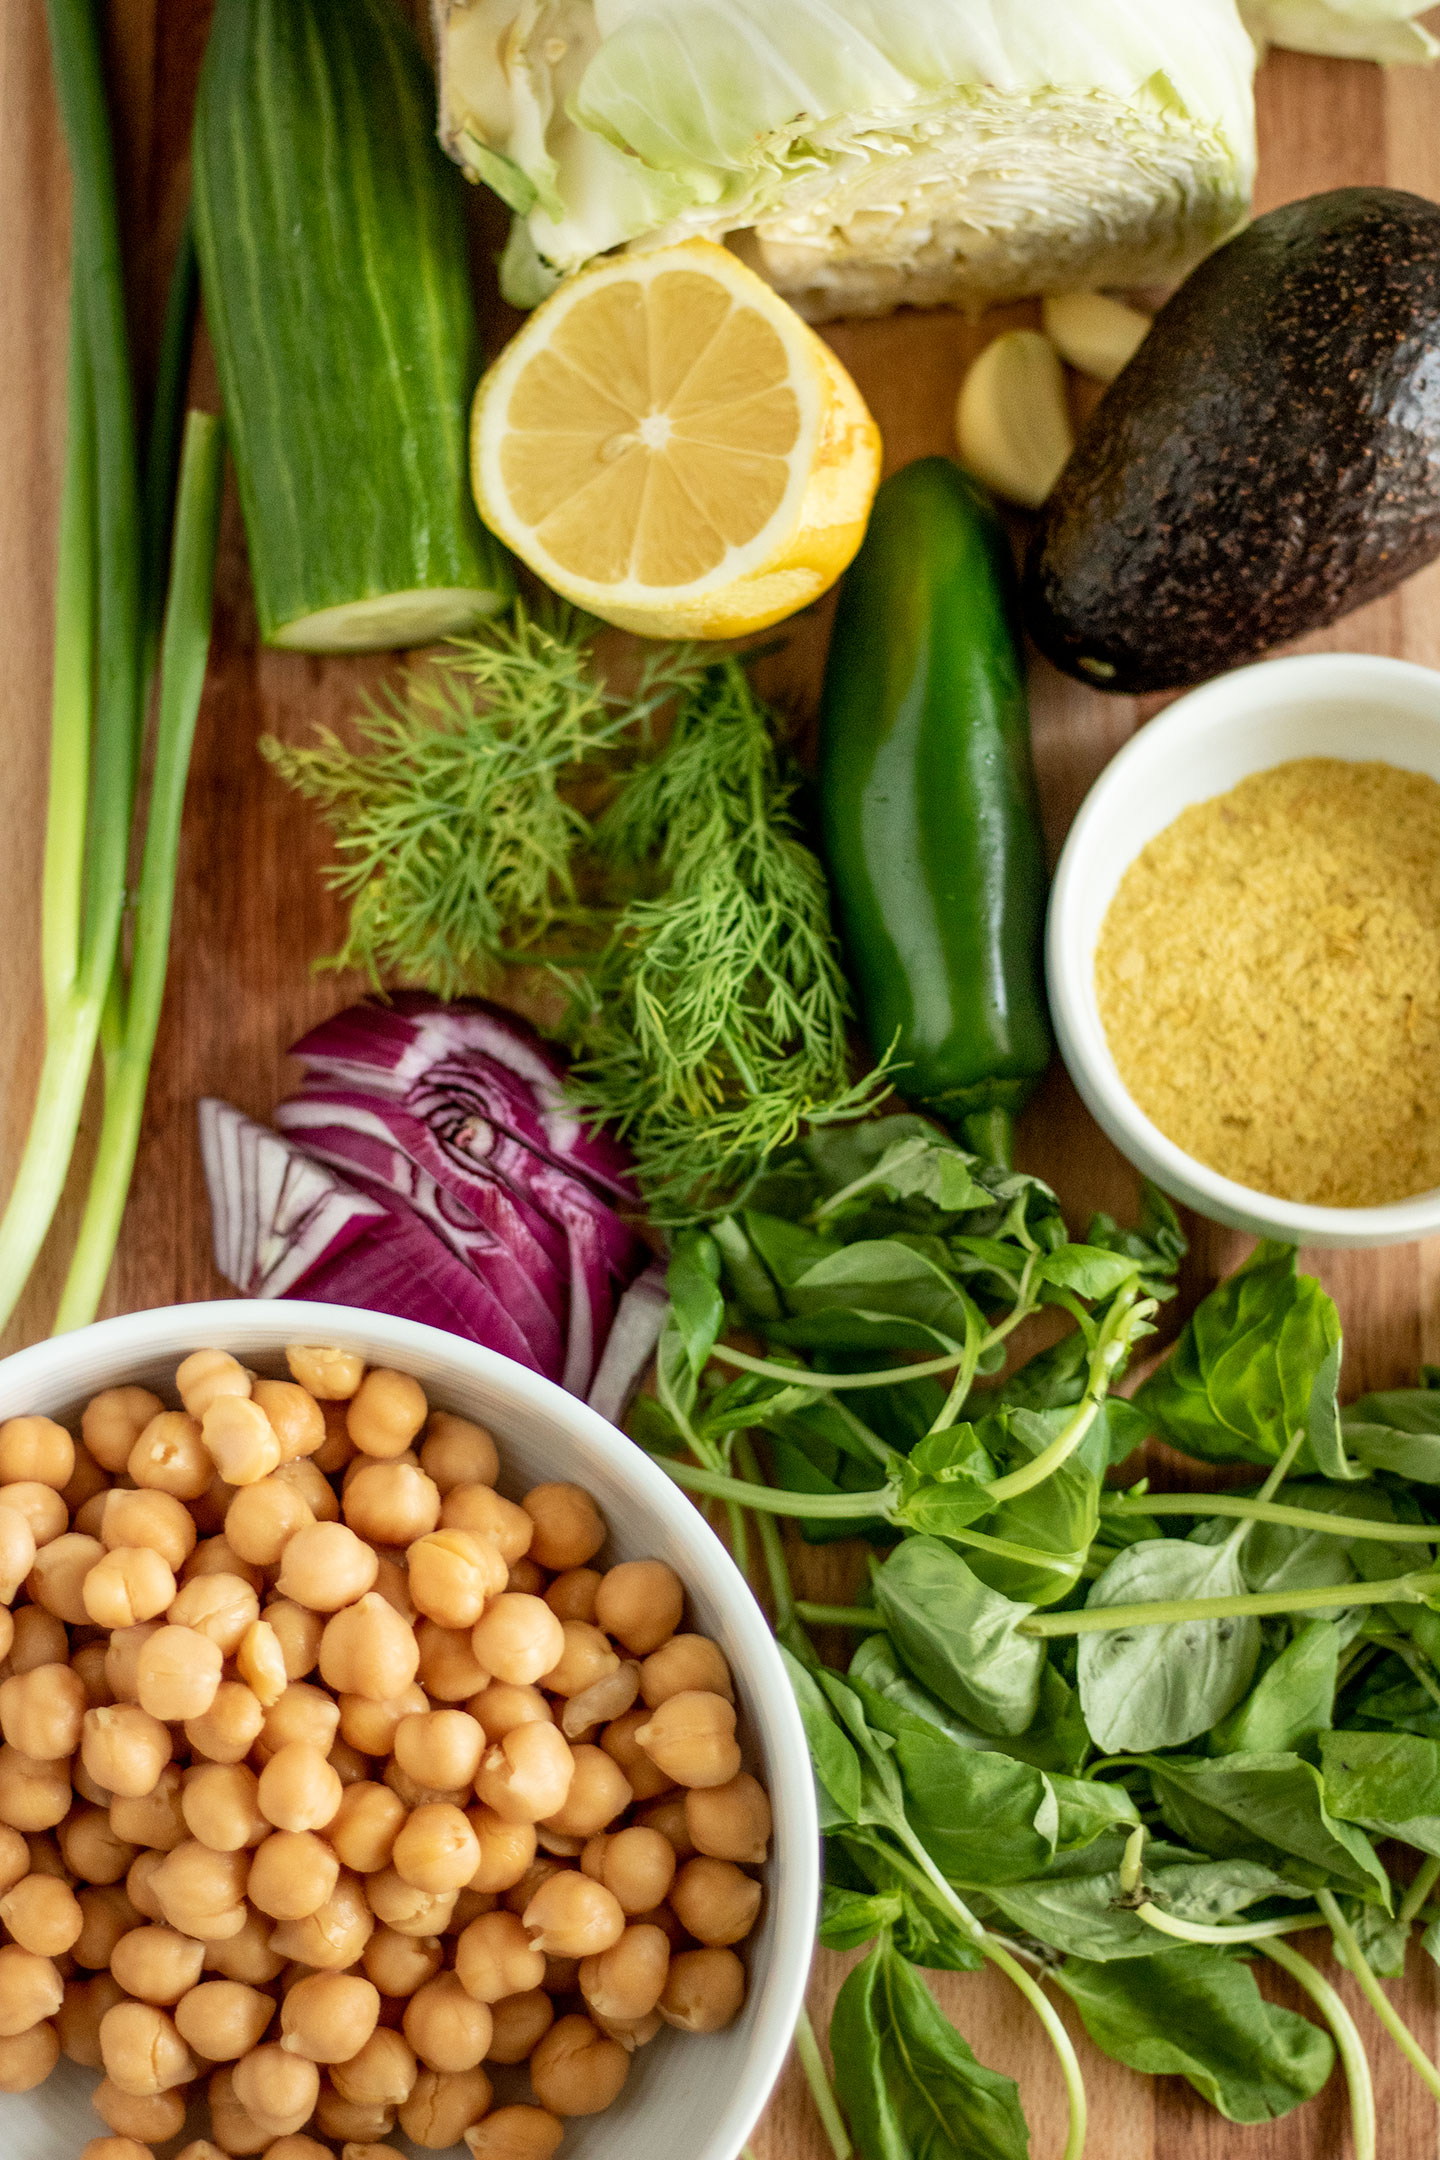 Salad dressing ingredients and sandwich ingredients on a cutting board including fresh herbs and chickpeas.